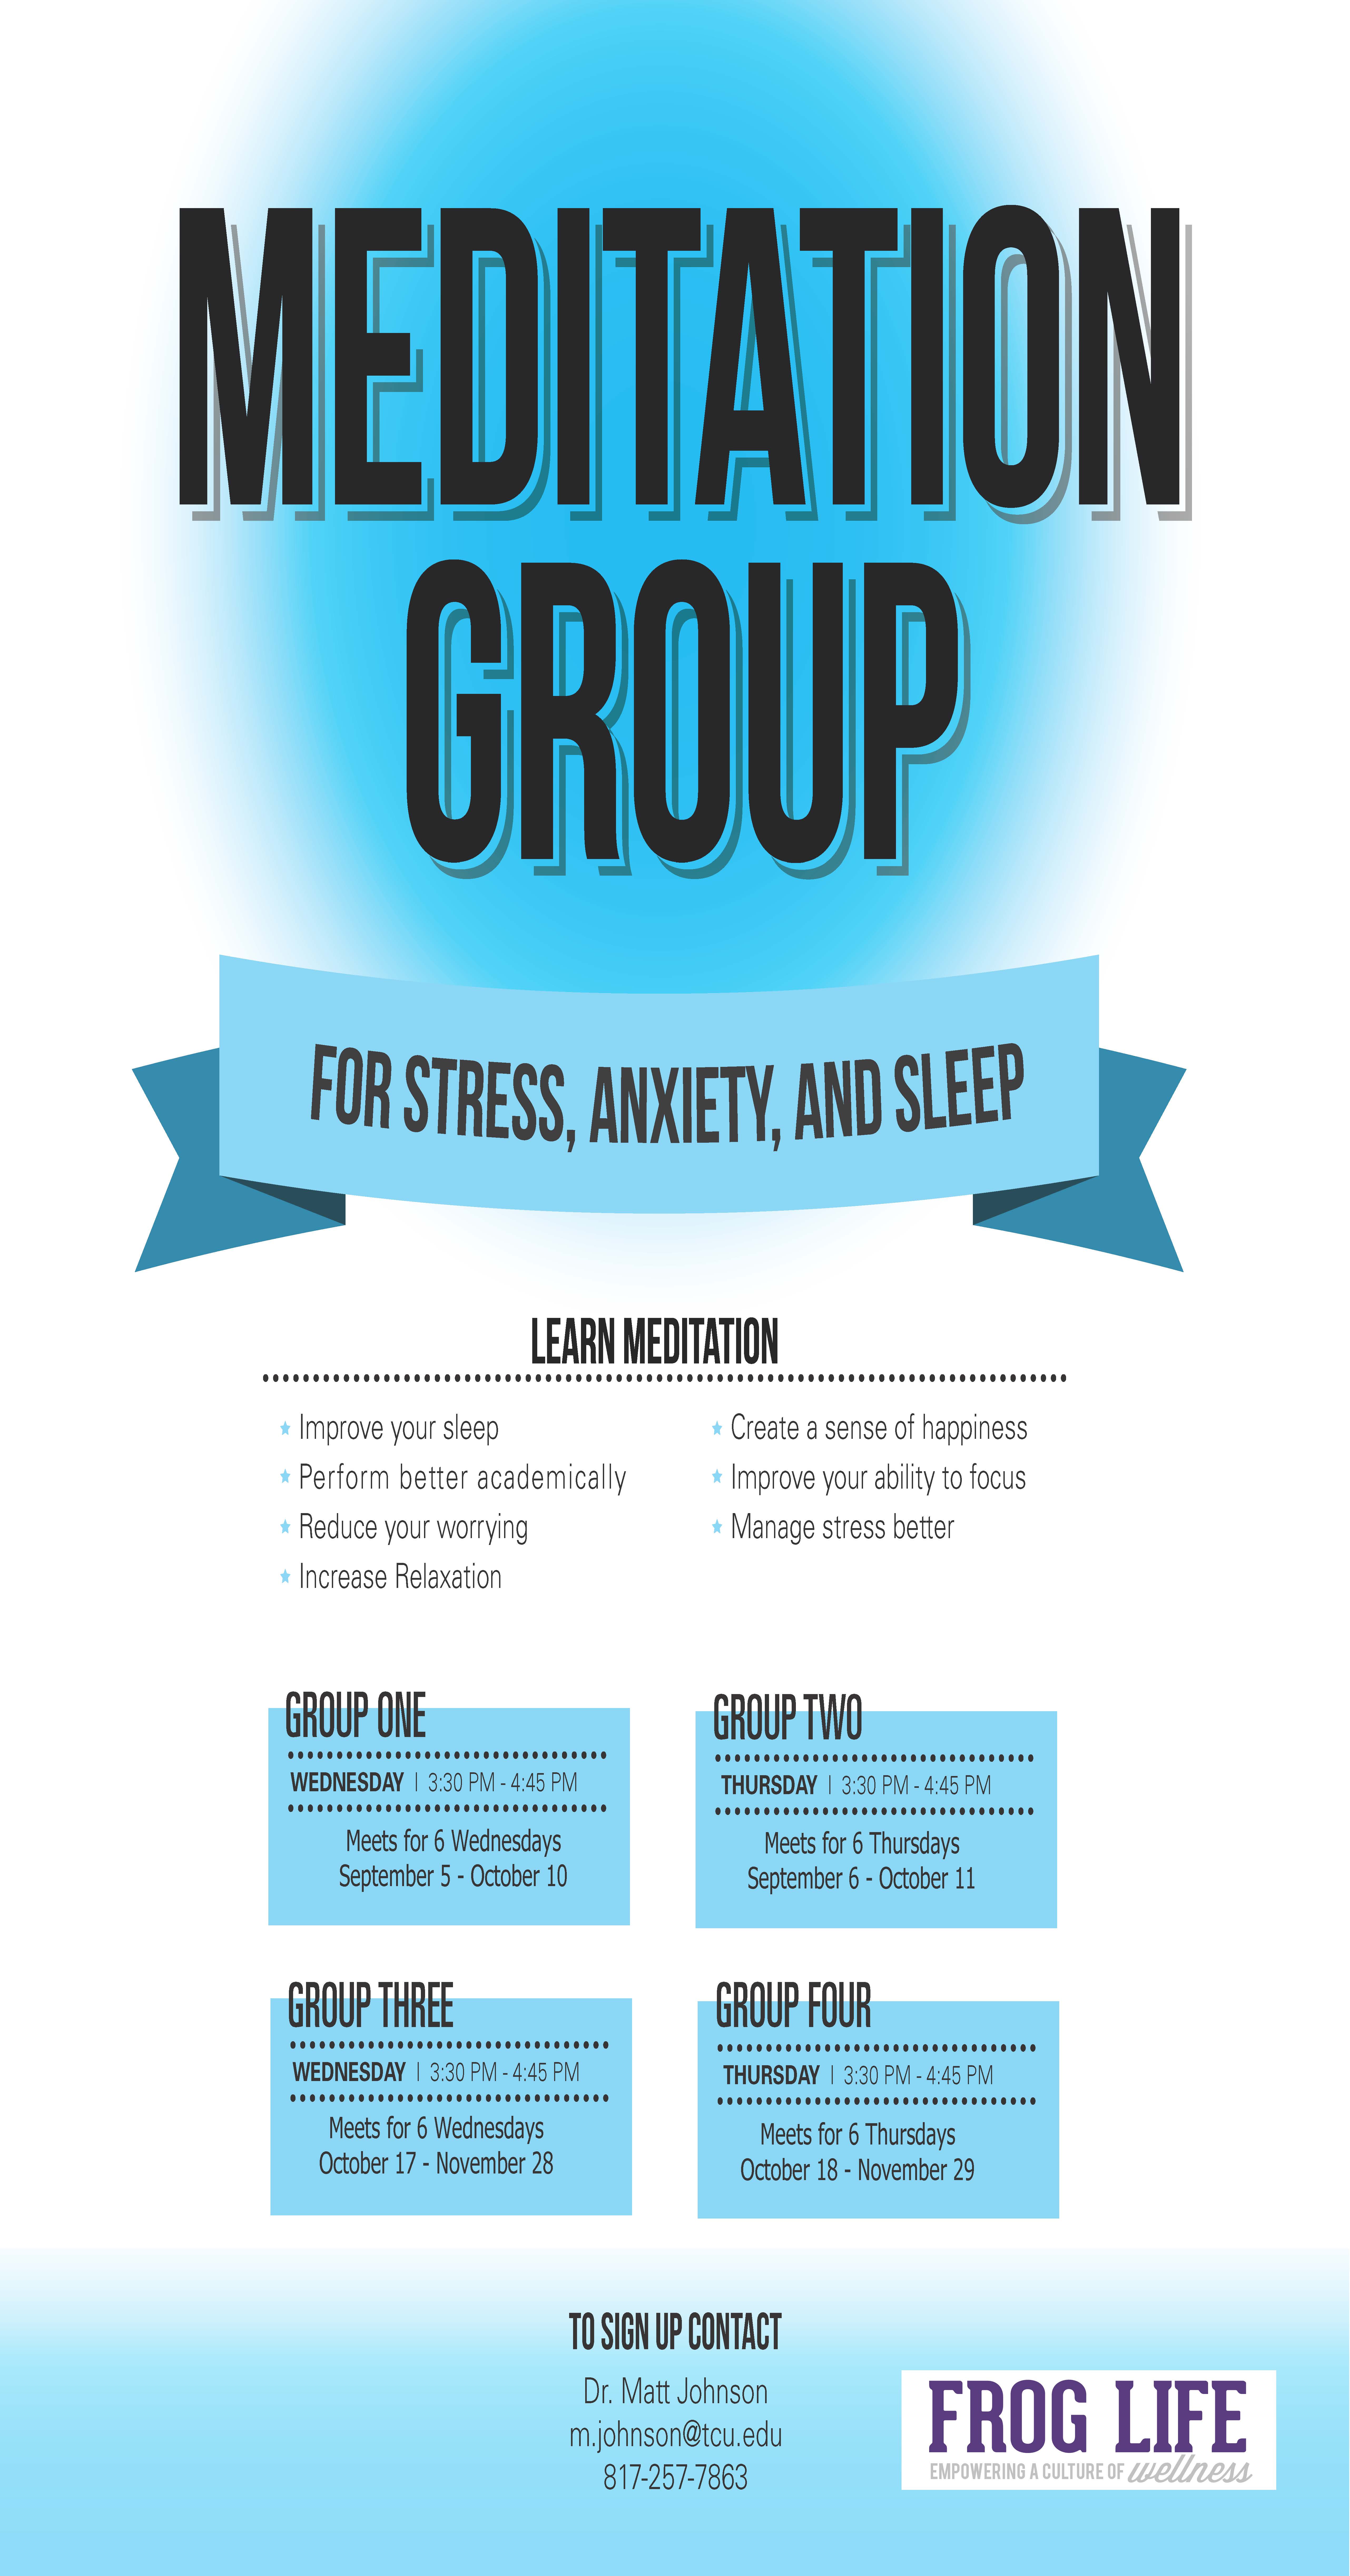 What2DoTCU Meditation Group for Stress, Anxiety, and Sleep